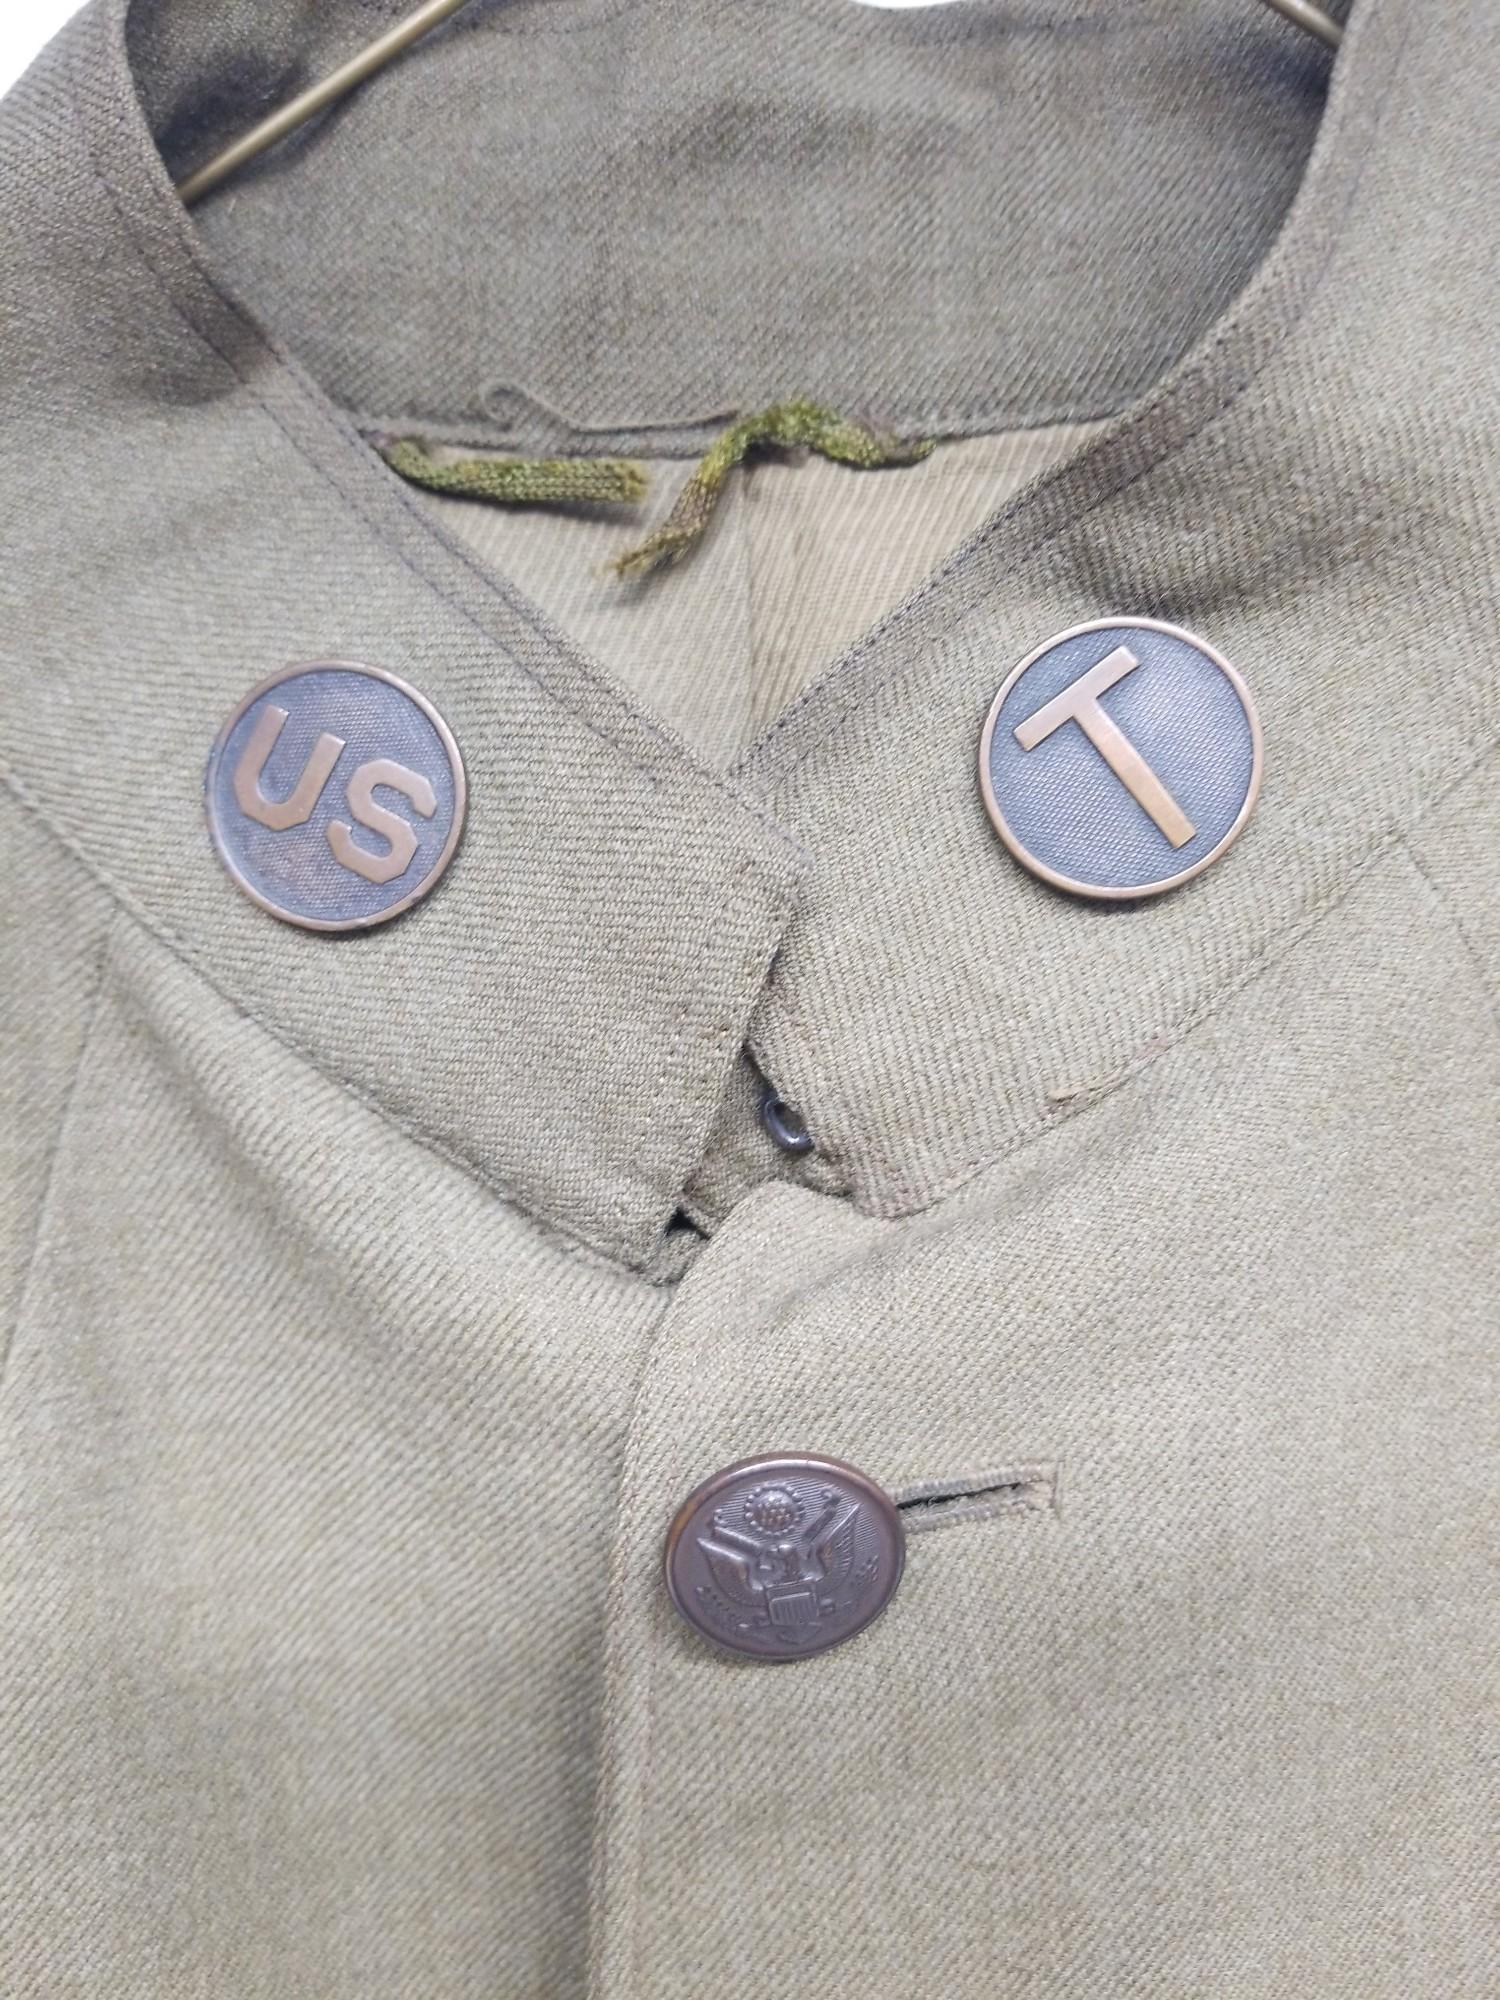 S.O.S (Service of Supply)tunic